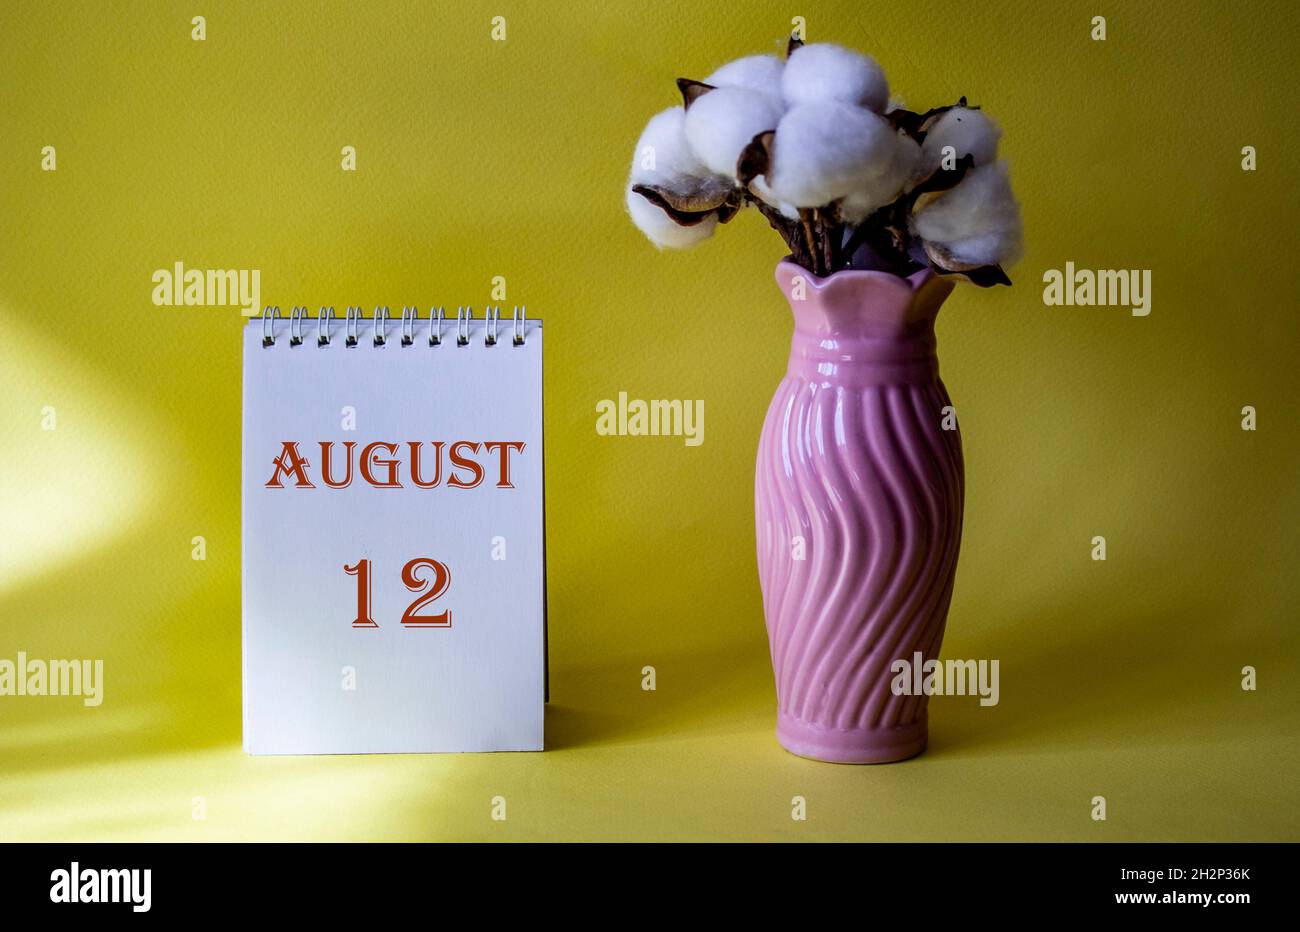 Calendar with text 12 august on yellow background and with a vase of flowers Stock Photo